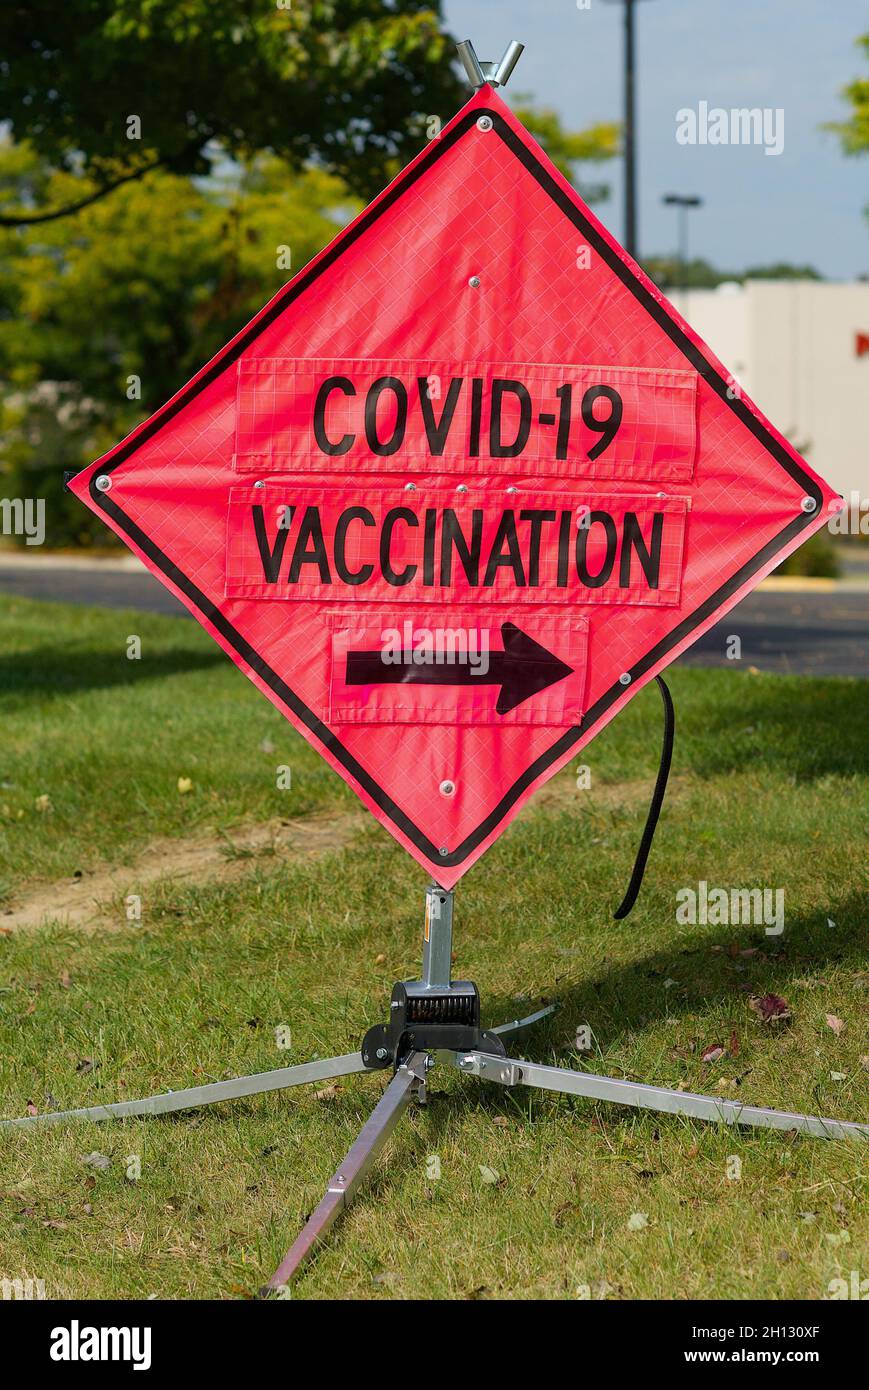 Woodbridge, Virginia, USA - October 15, 2021: A bright orange 'construction' sign shows drivers the entrance to a public COVID-19 vaccination site. Stock Photo